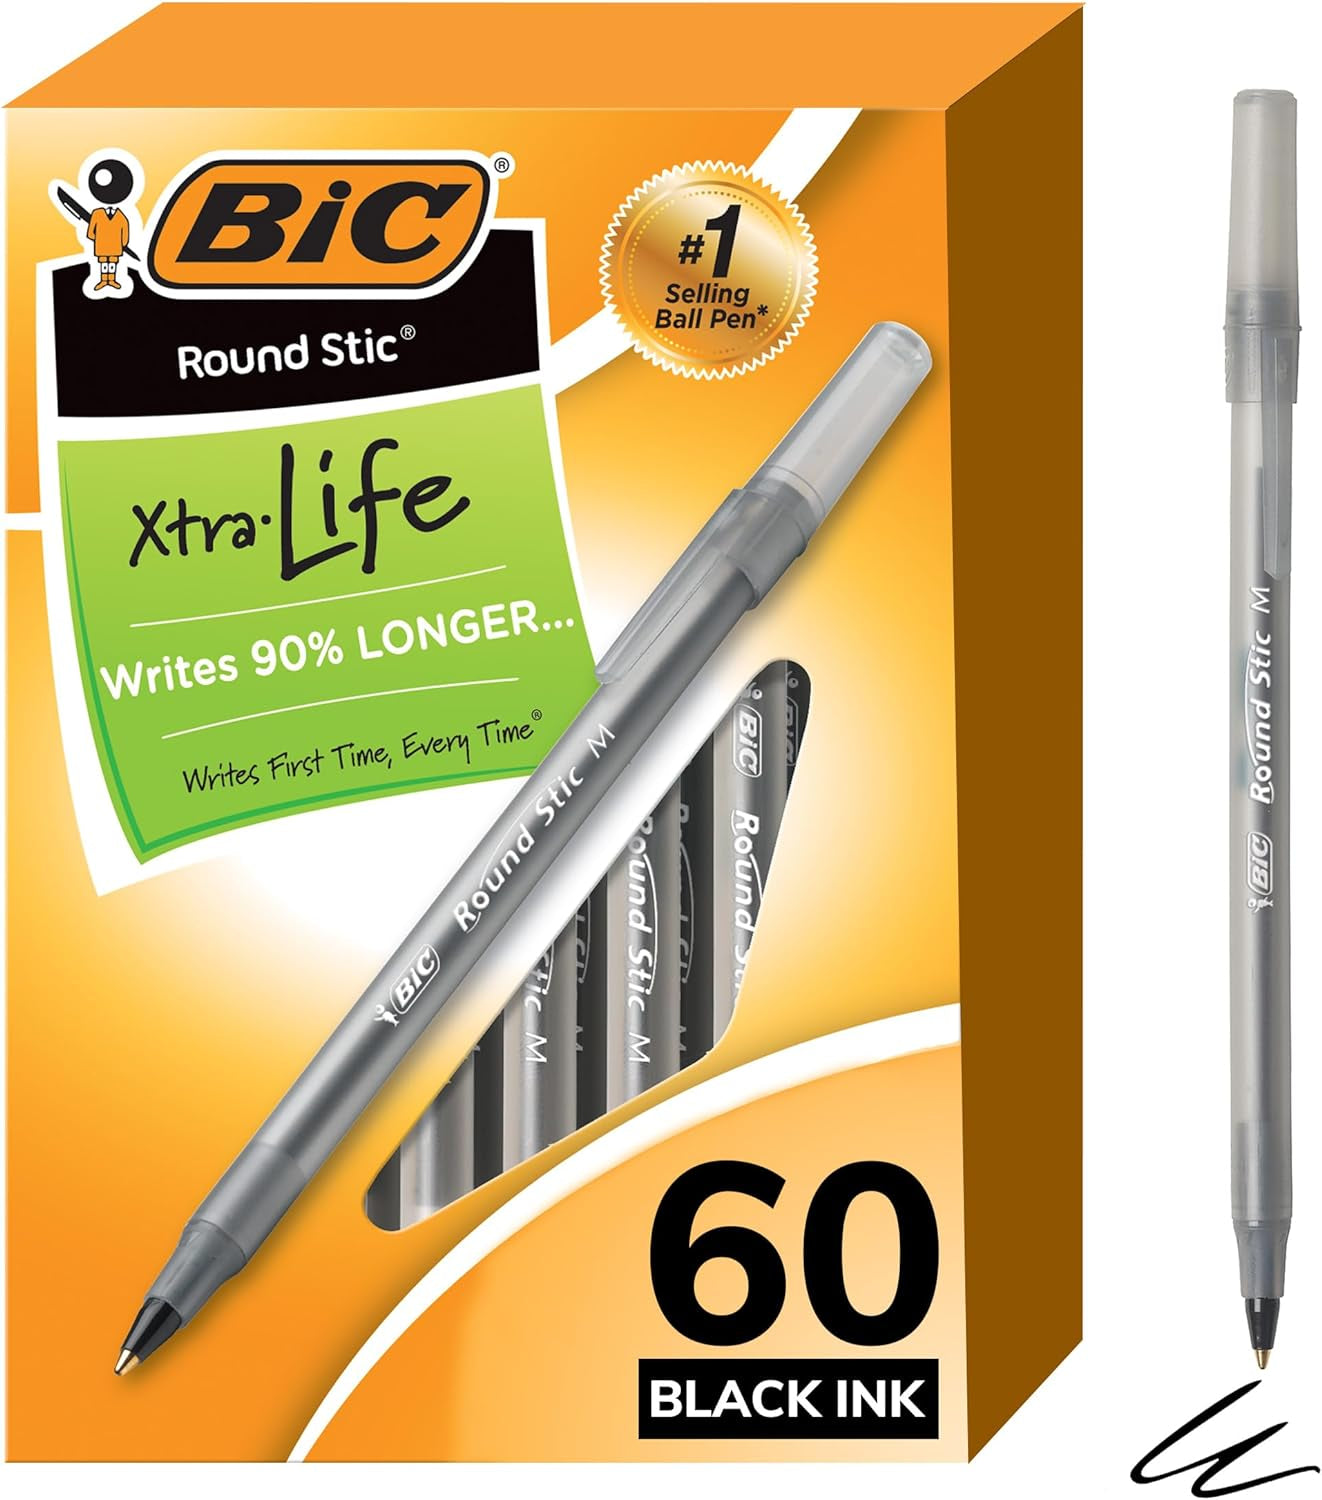 round Stic Xtra Life Ballpoint Pens, Medium Point (1.0Mm), Black, 60-Count Pack, Flexible round Barrel for Writing Comfort, Perfect Teacher Appreciation Gifts